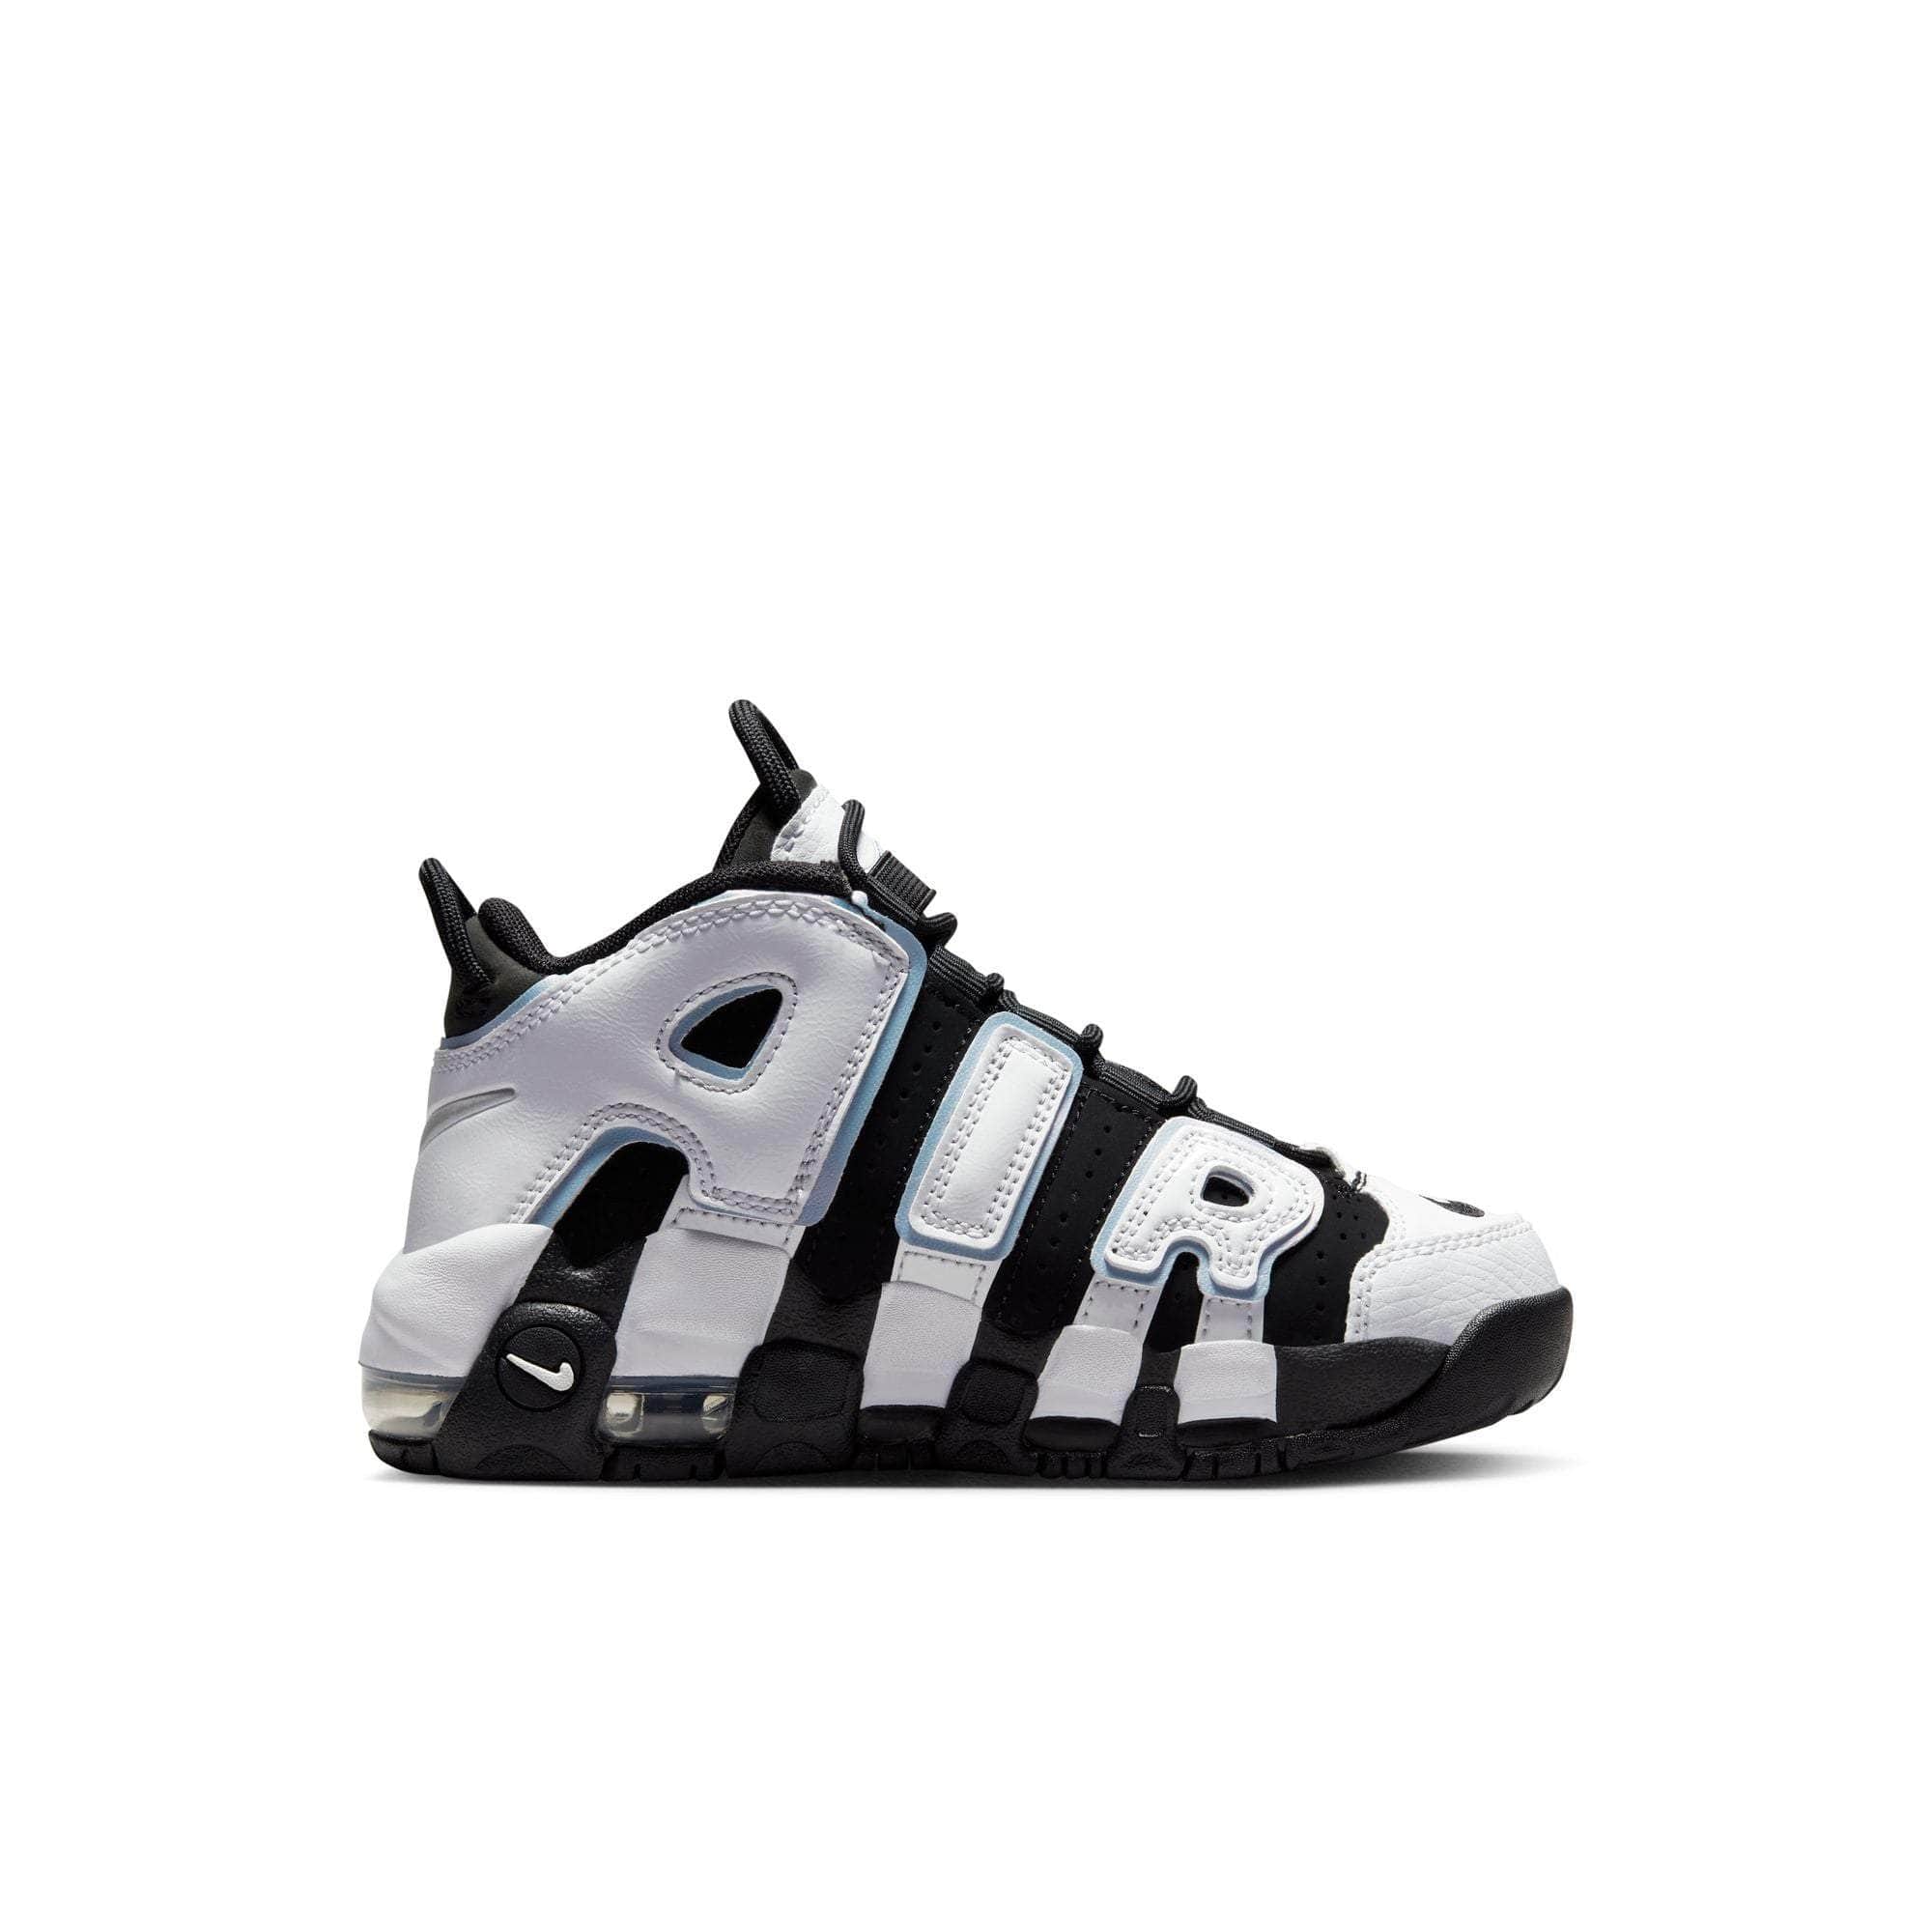 Leather Daily Wear Nike Air More Uptempo 96 Premium black Men's shoes